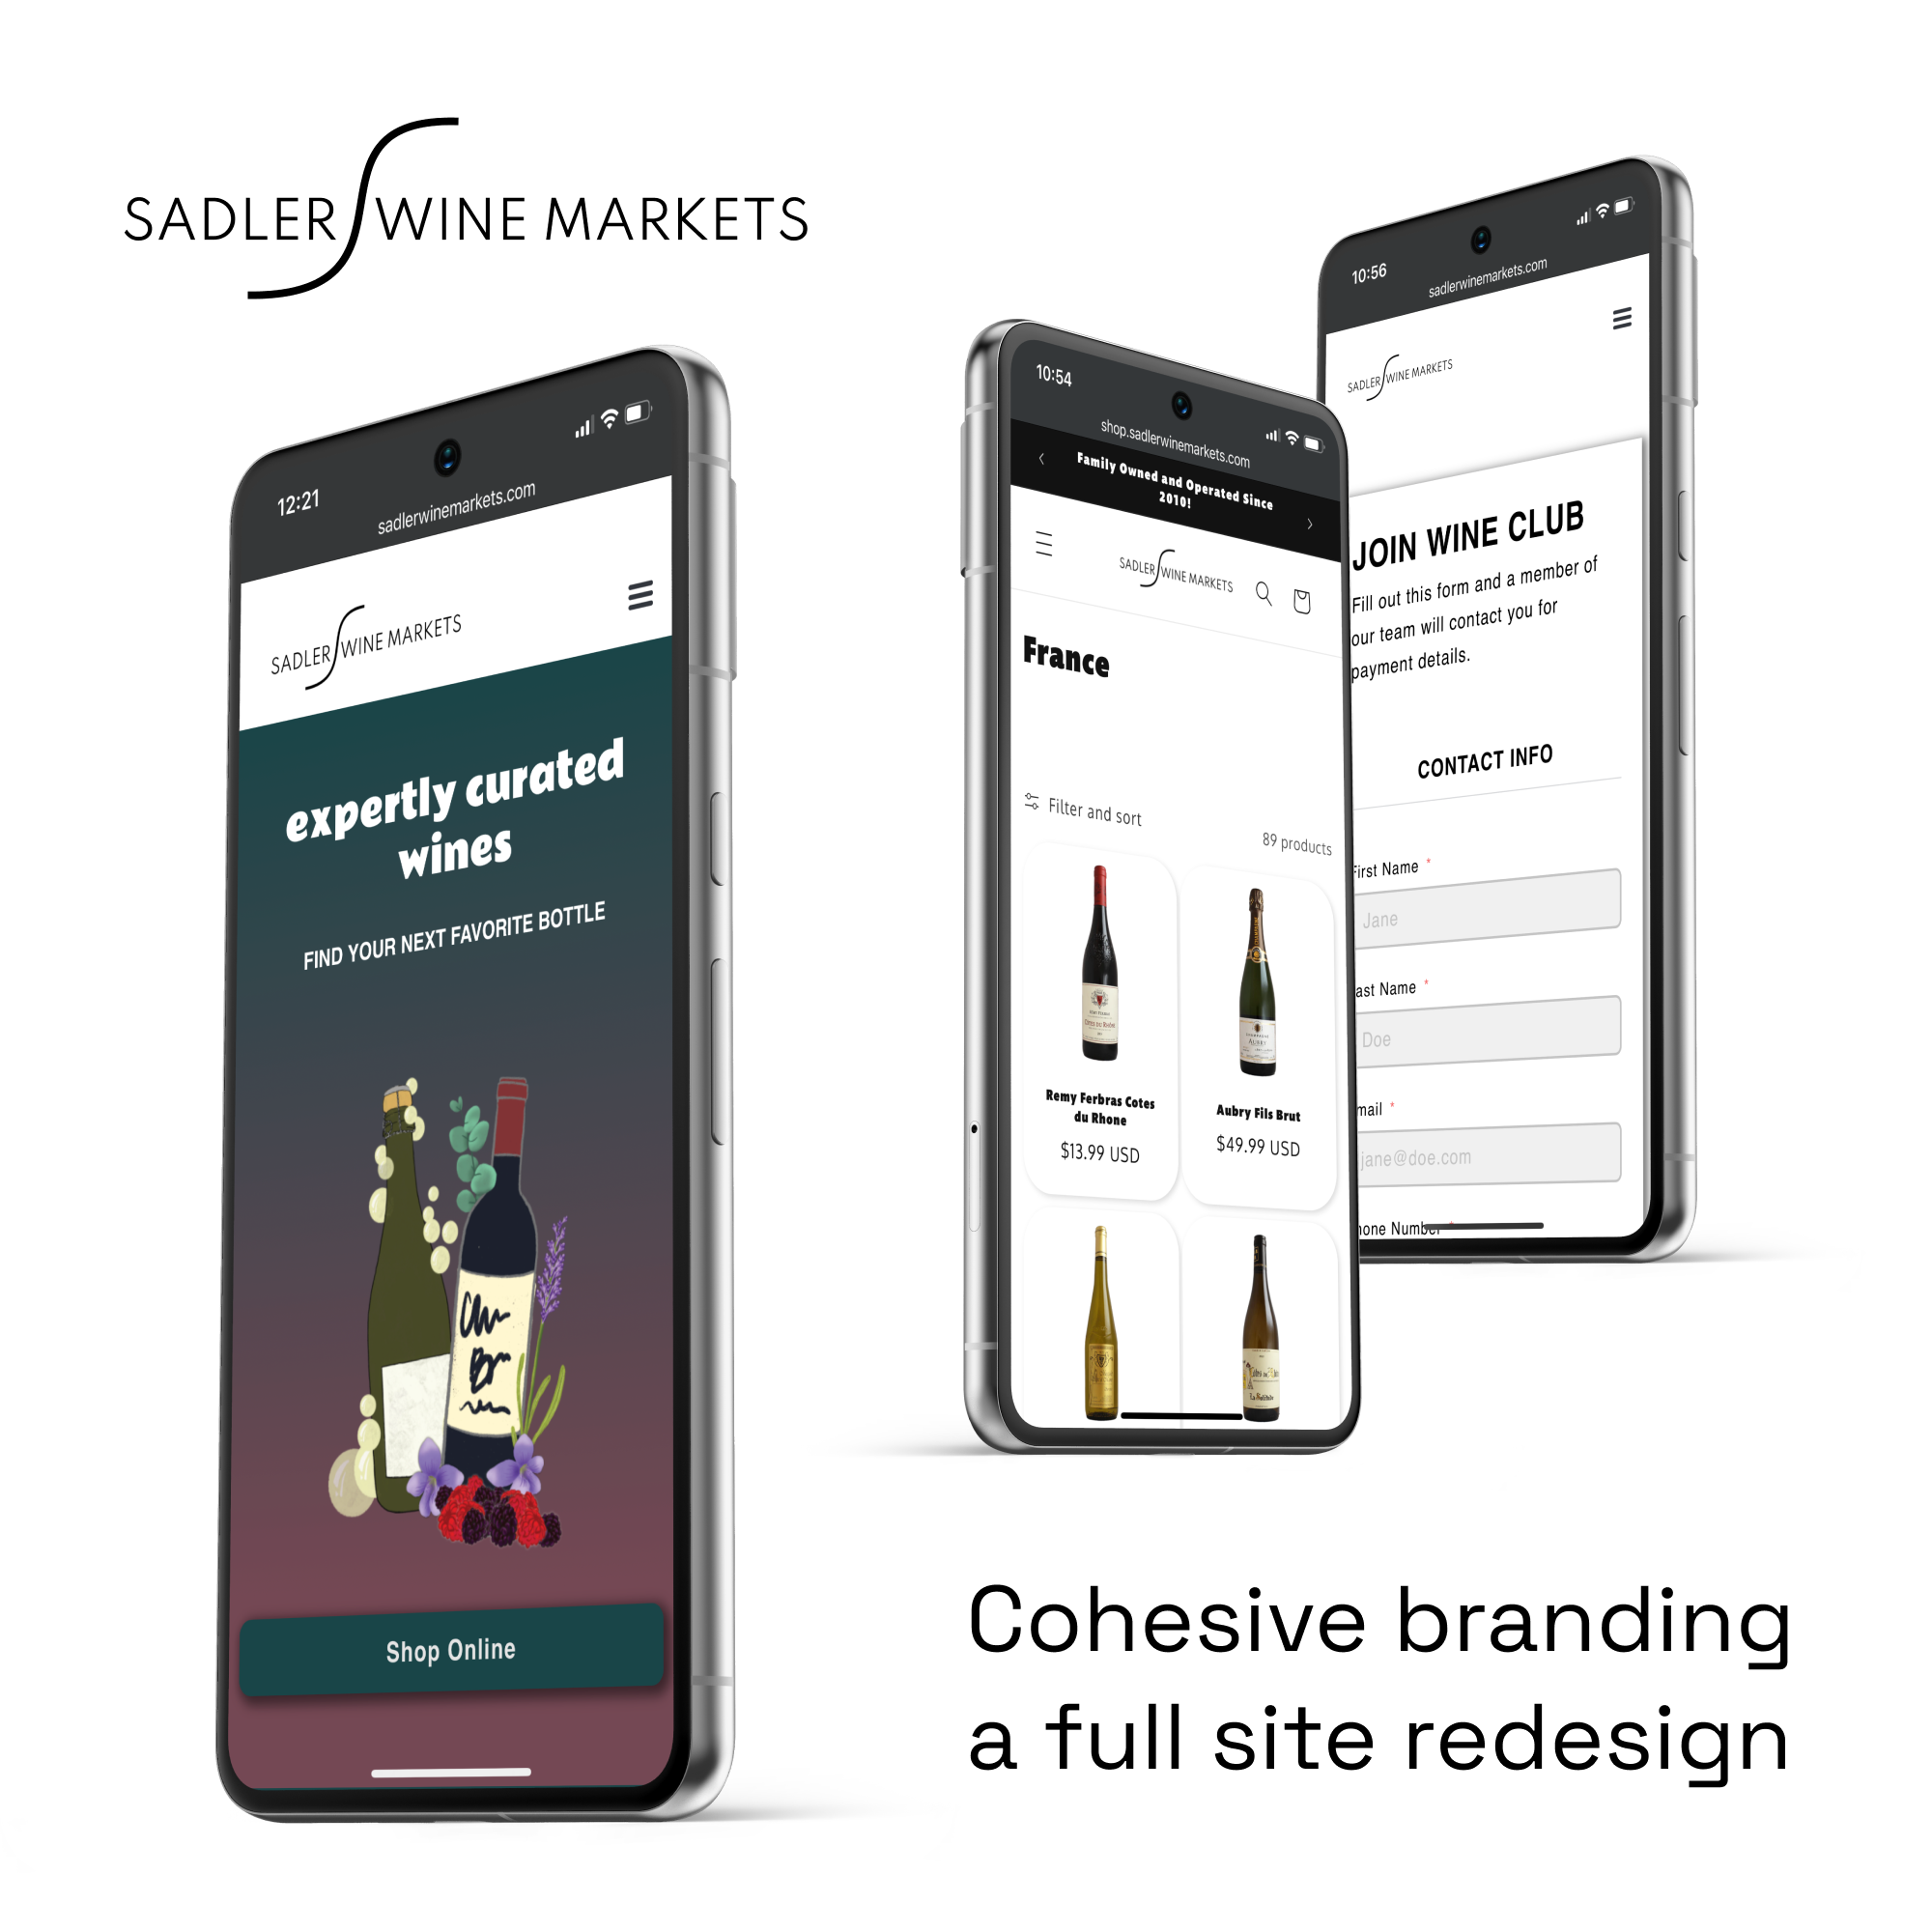 Sadler Wine Markets project. Cohesive branding and a full site redesign. Three phone images with various screens.